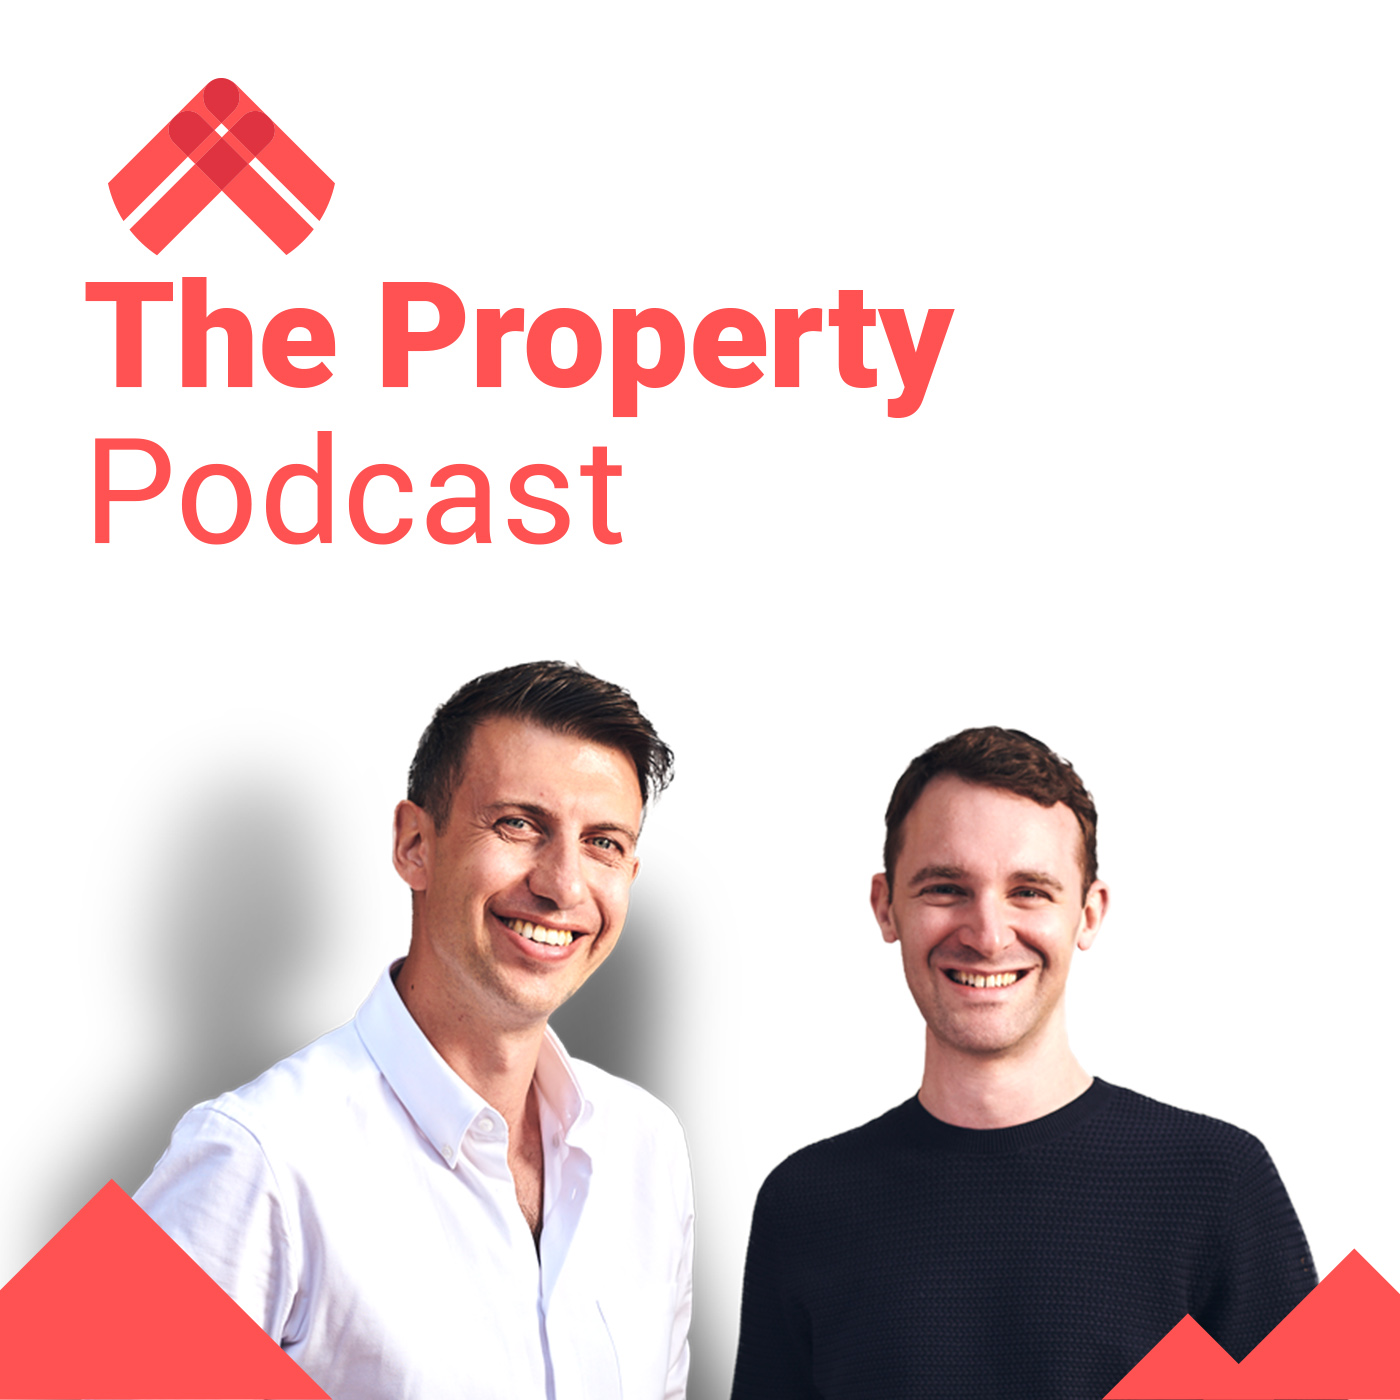 TPP435: What traits make a successful property investor?